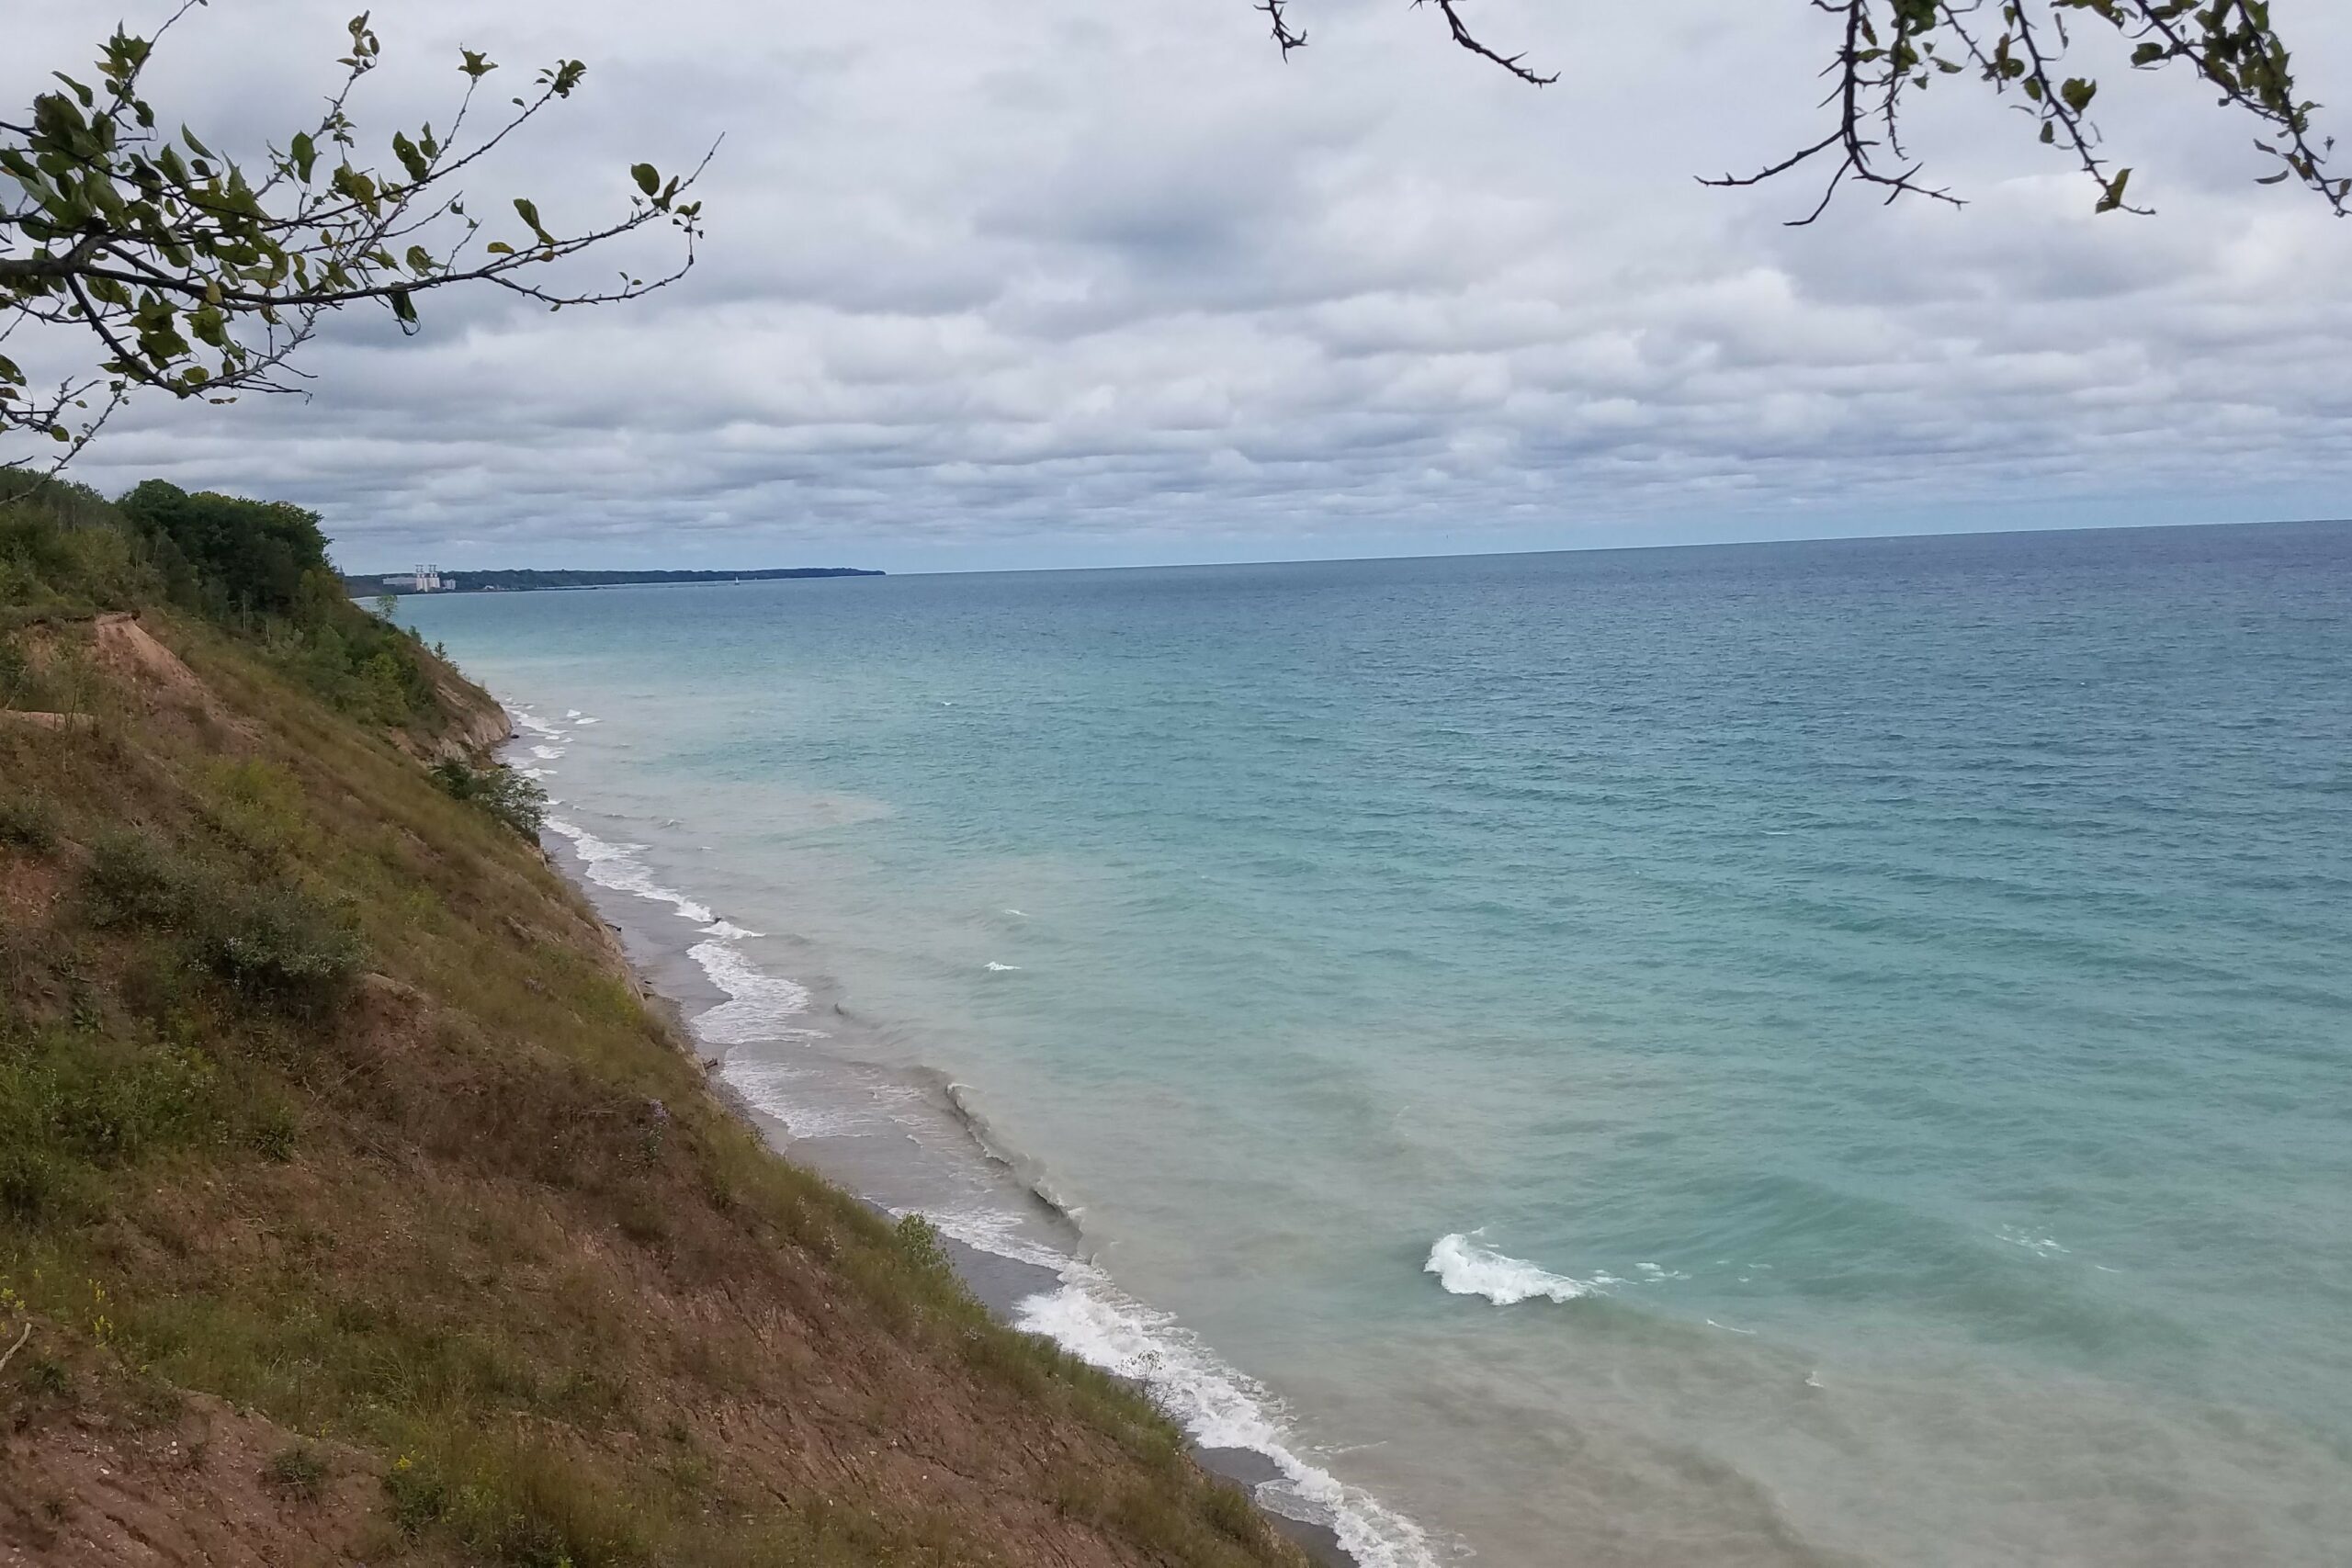 Image of a steep coastal embankment where sand and soil are washing into the lake creating cloudy water along the coastline.